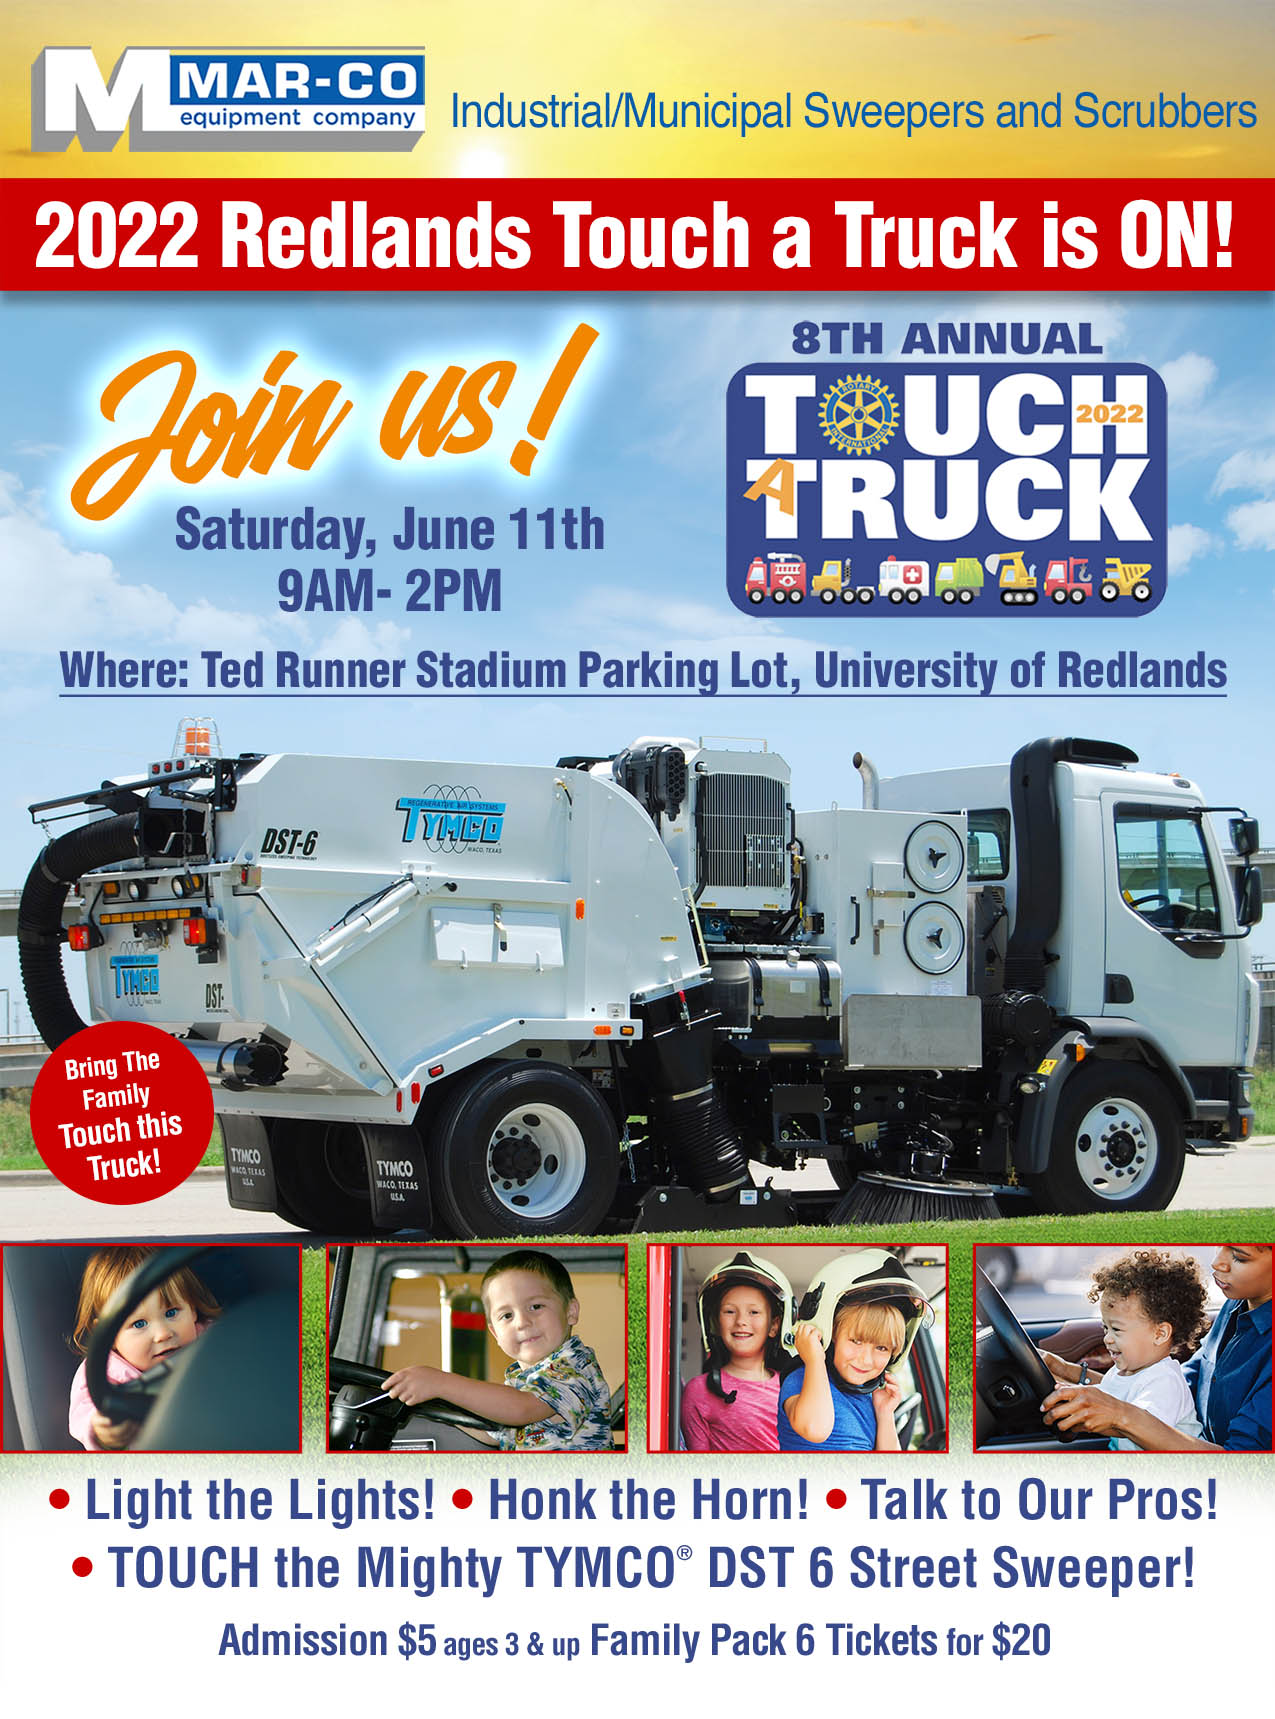 Touch a Truck Event - June 11th, 2022 Redlands, CA